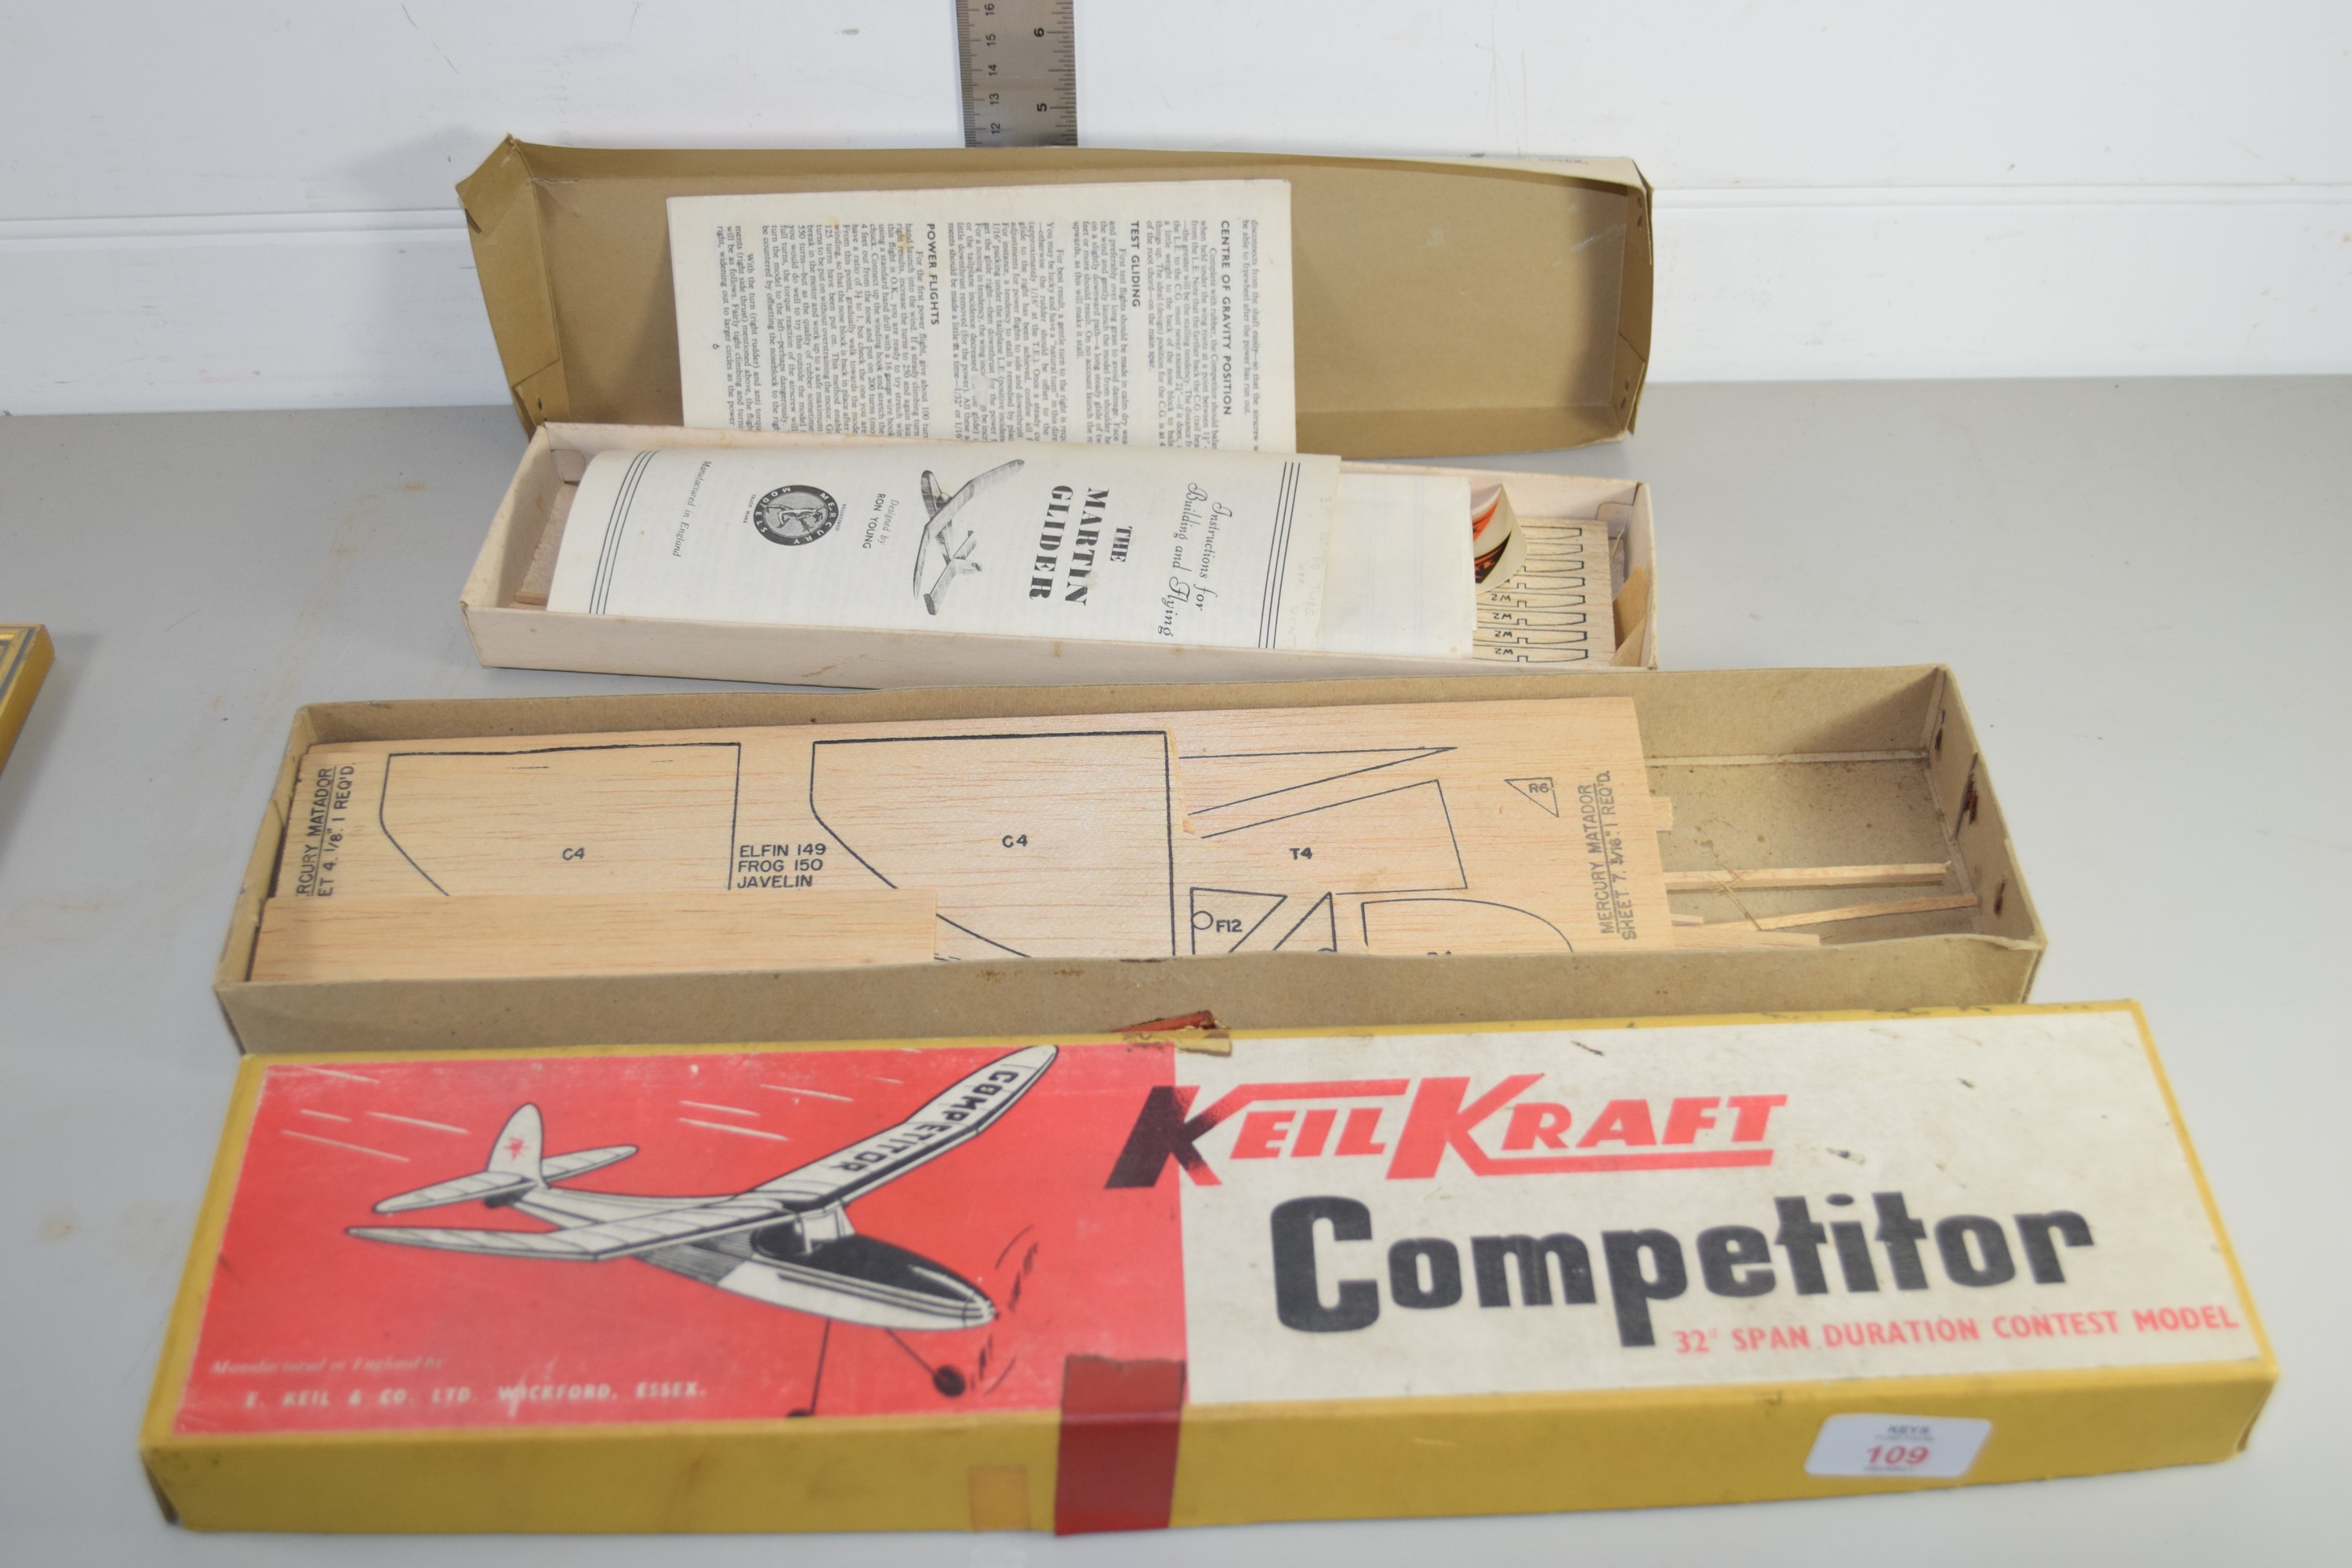 CUB GLIDER IN ORIGINAL KIT IN BOX, TOGETHER WITH A KEIL CRAFT COMPETITOR AEROPLANE